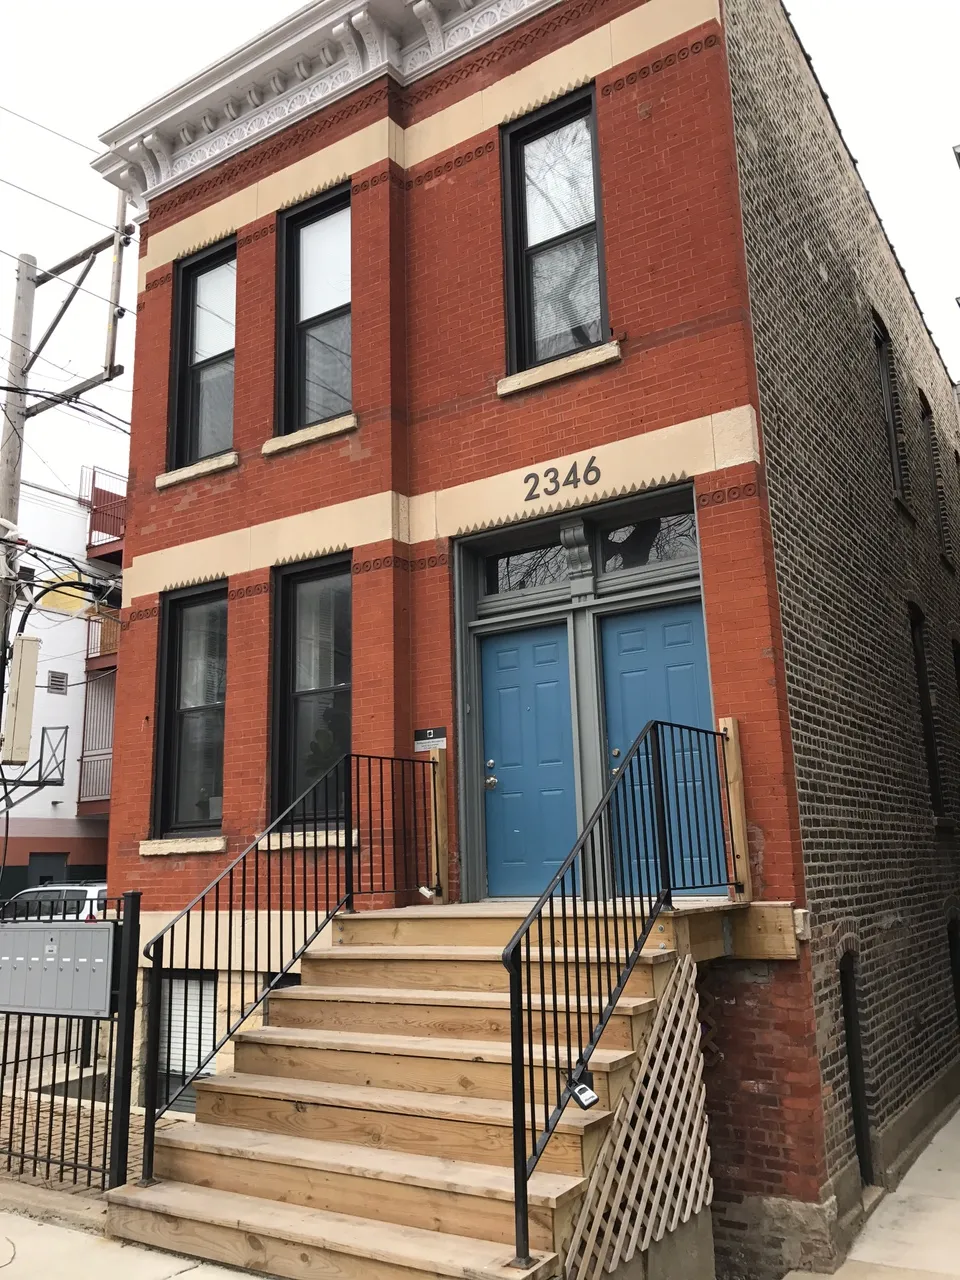 2346 W MCLEAN AVE 60647-2346 W McLean-Chicago-IL